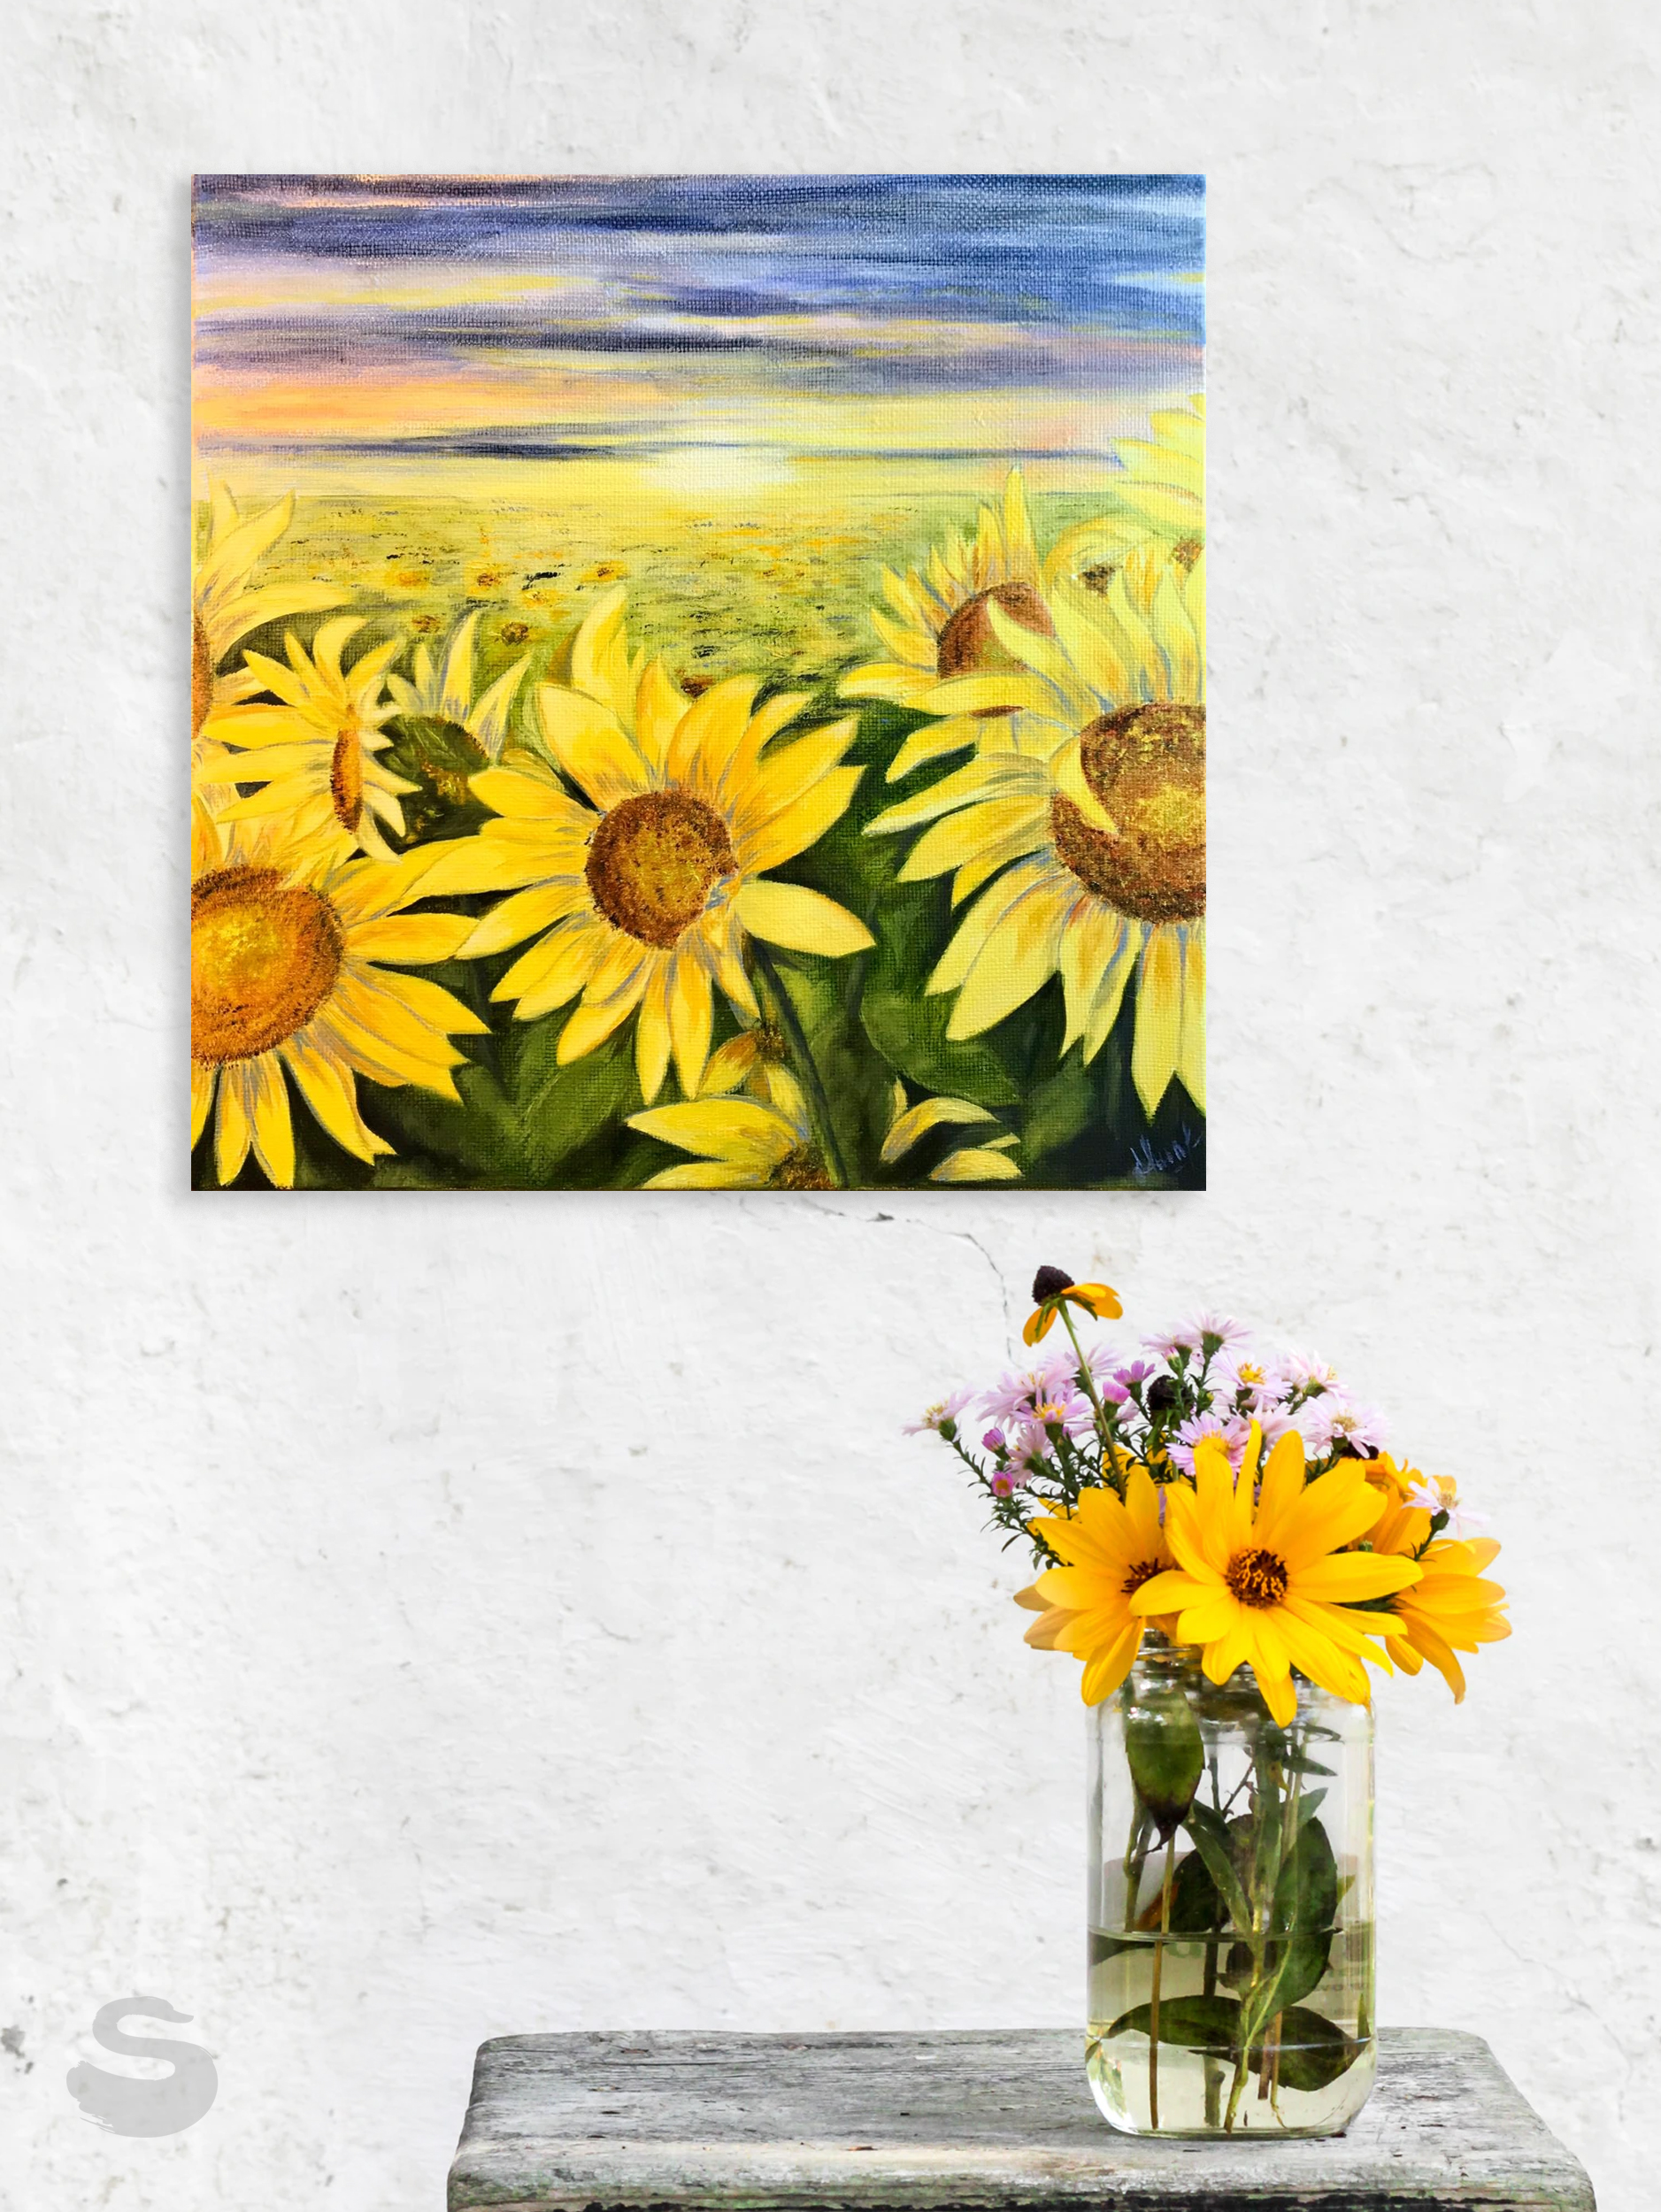 Sunflowers Floral Original oil painting on canvas board 5x7